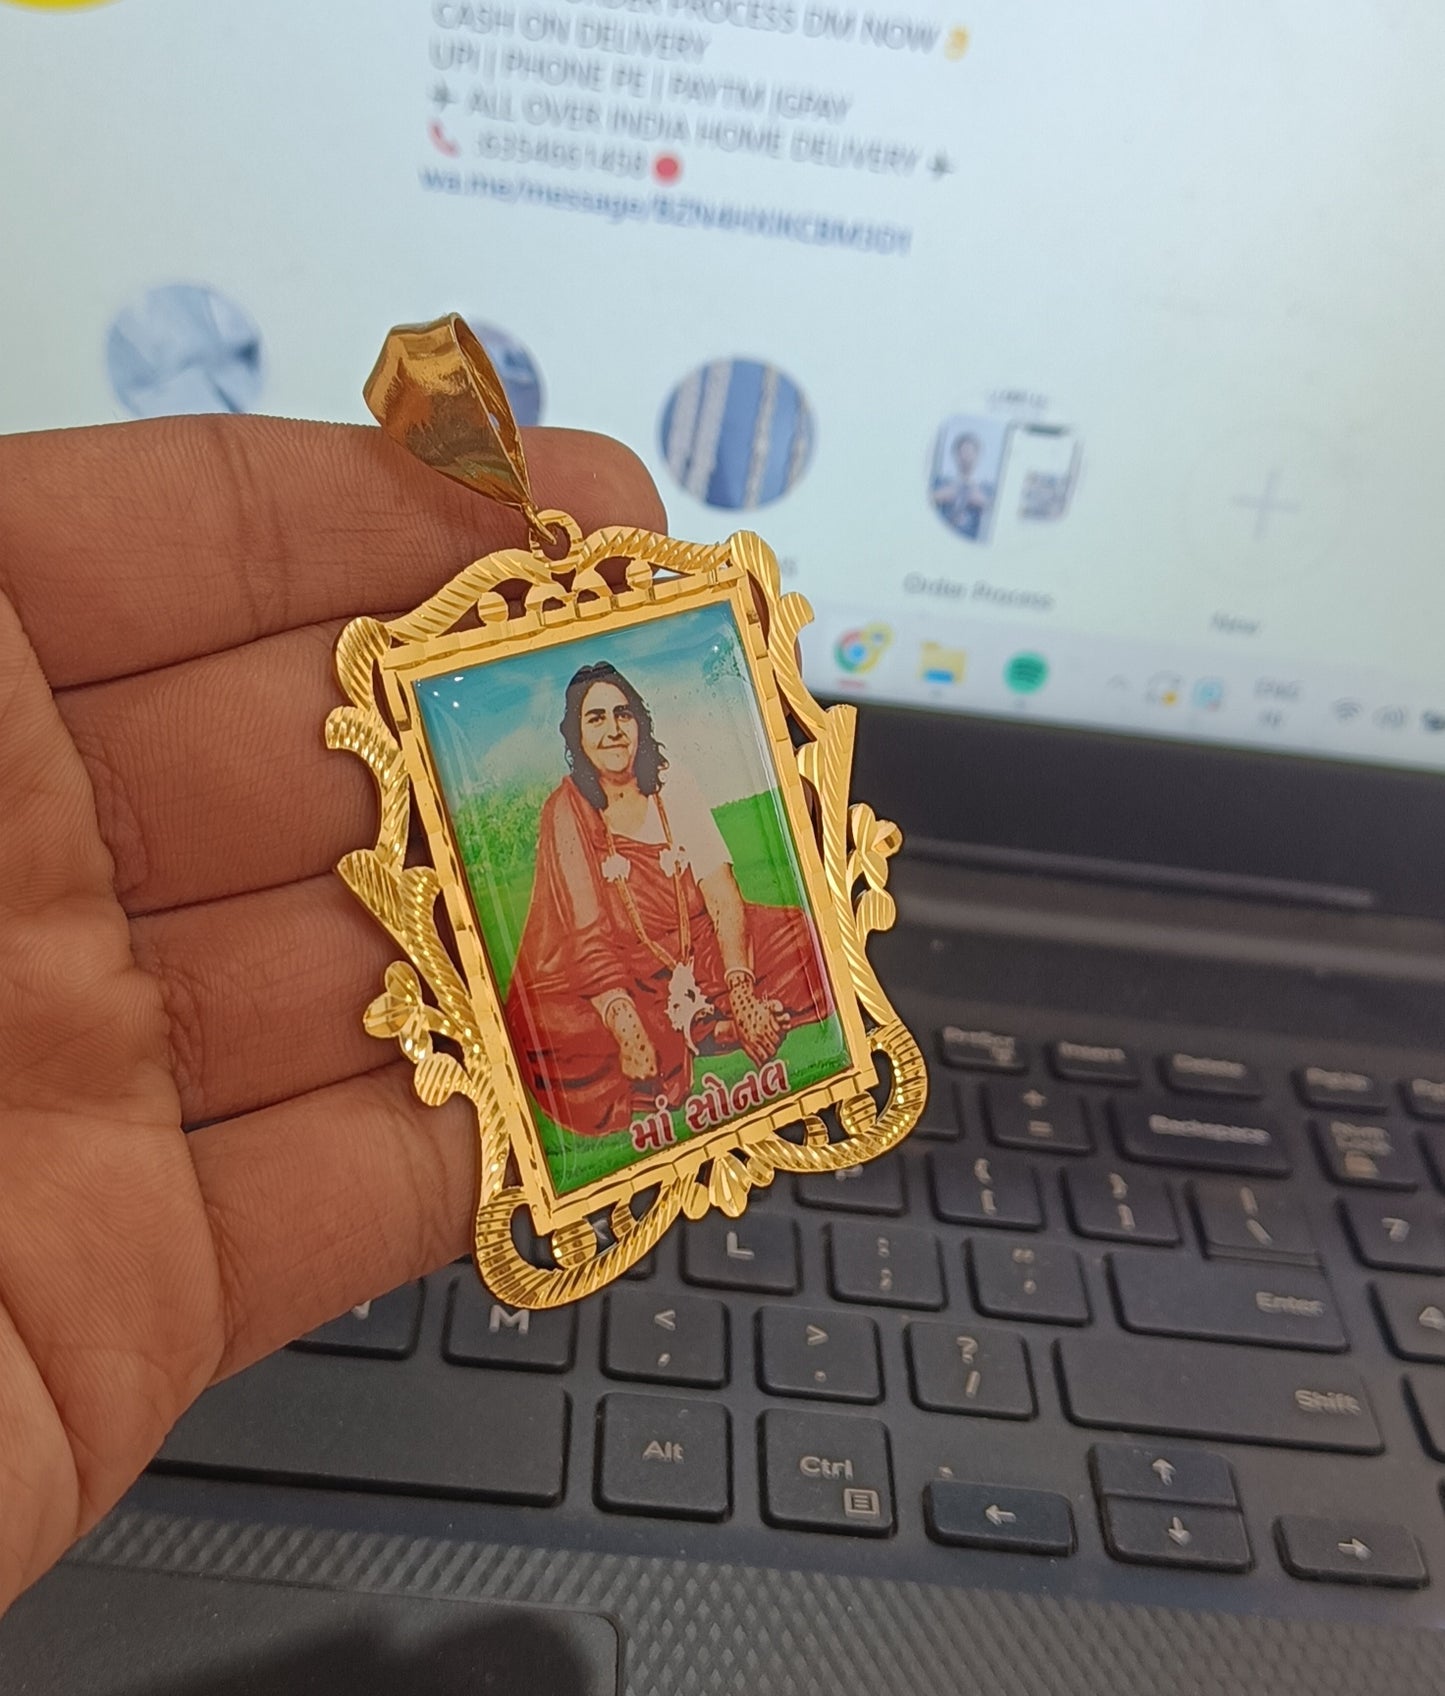 Jay Sonal Maa Photo High Quality Gold Plated Pendant